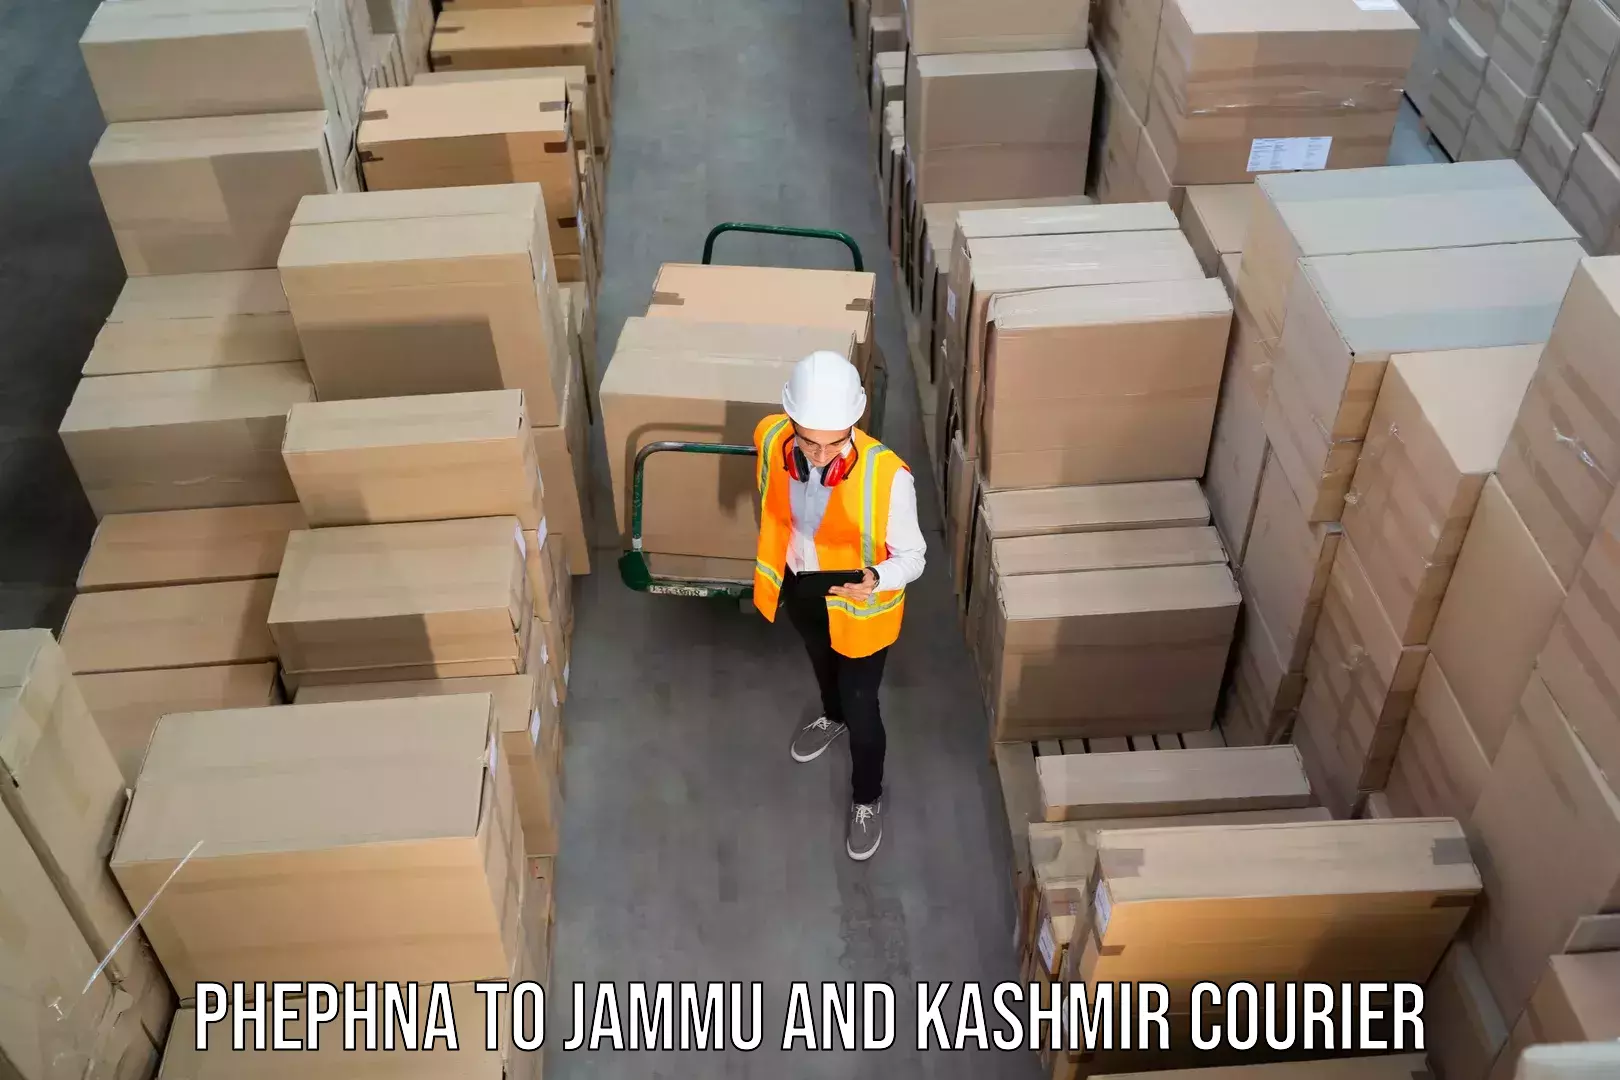 Express package services Phephna to Ramnagar Udhampur